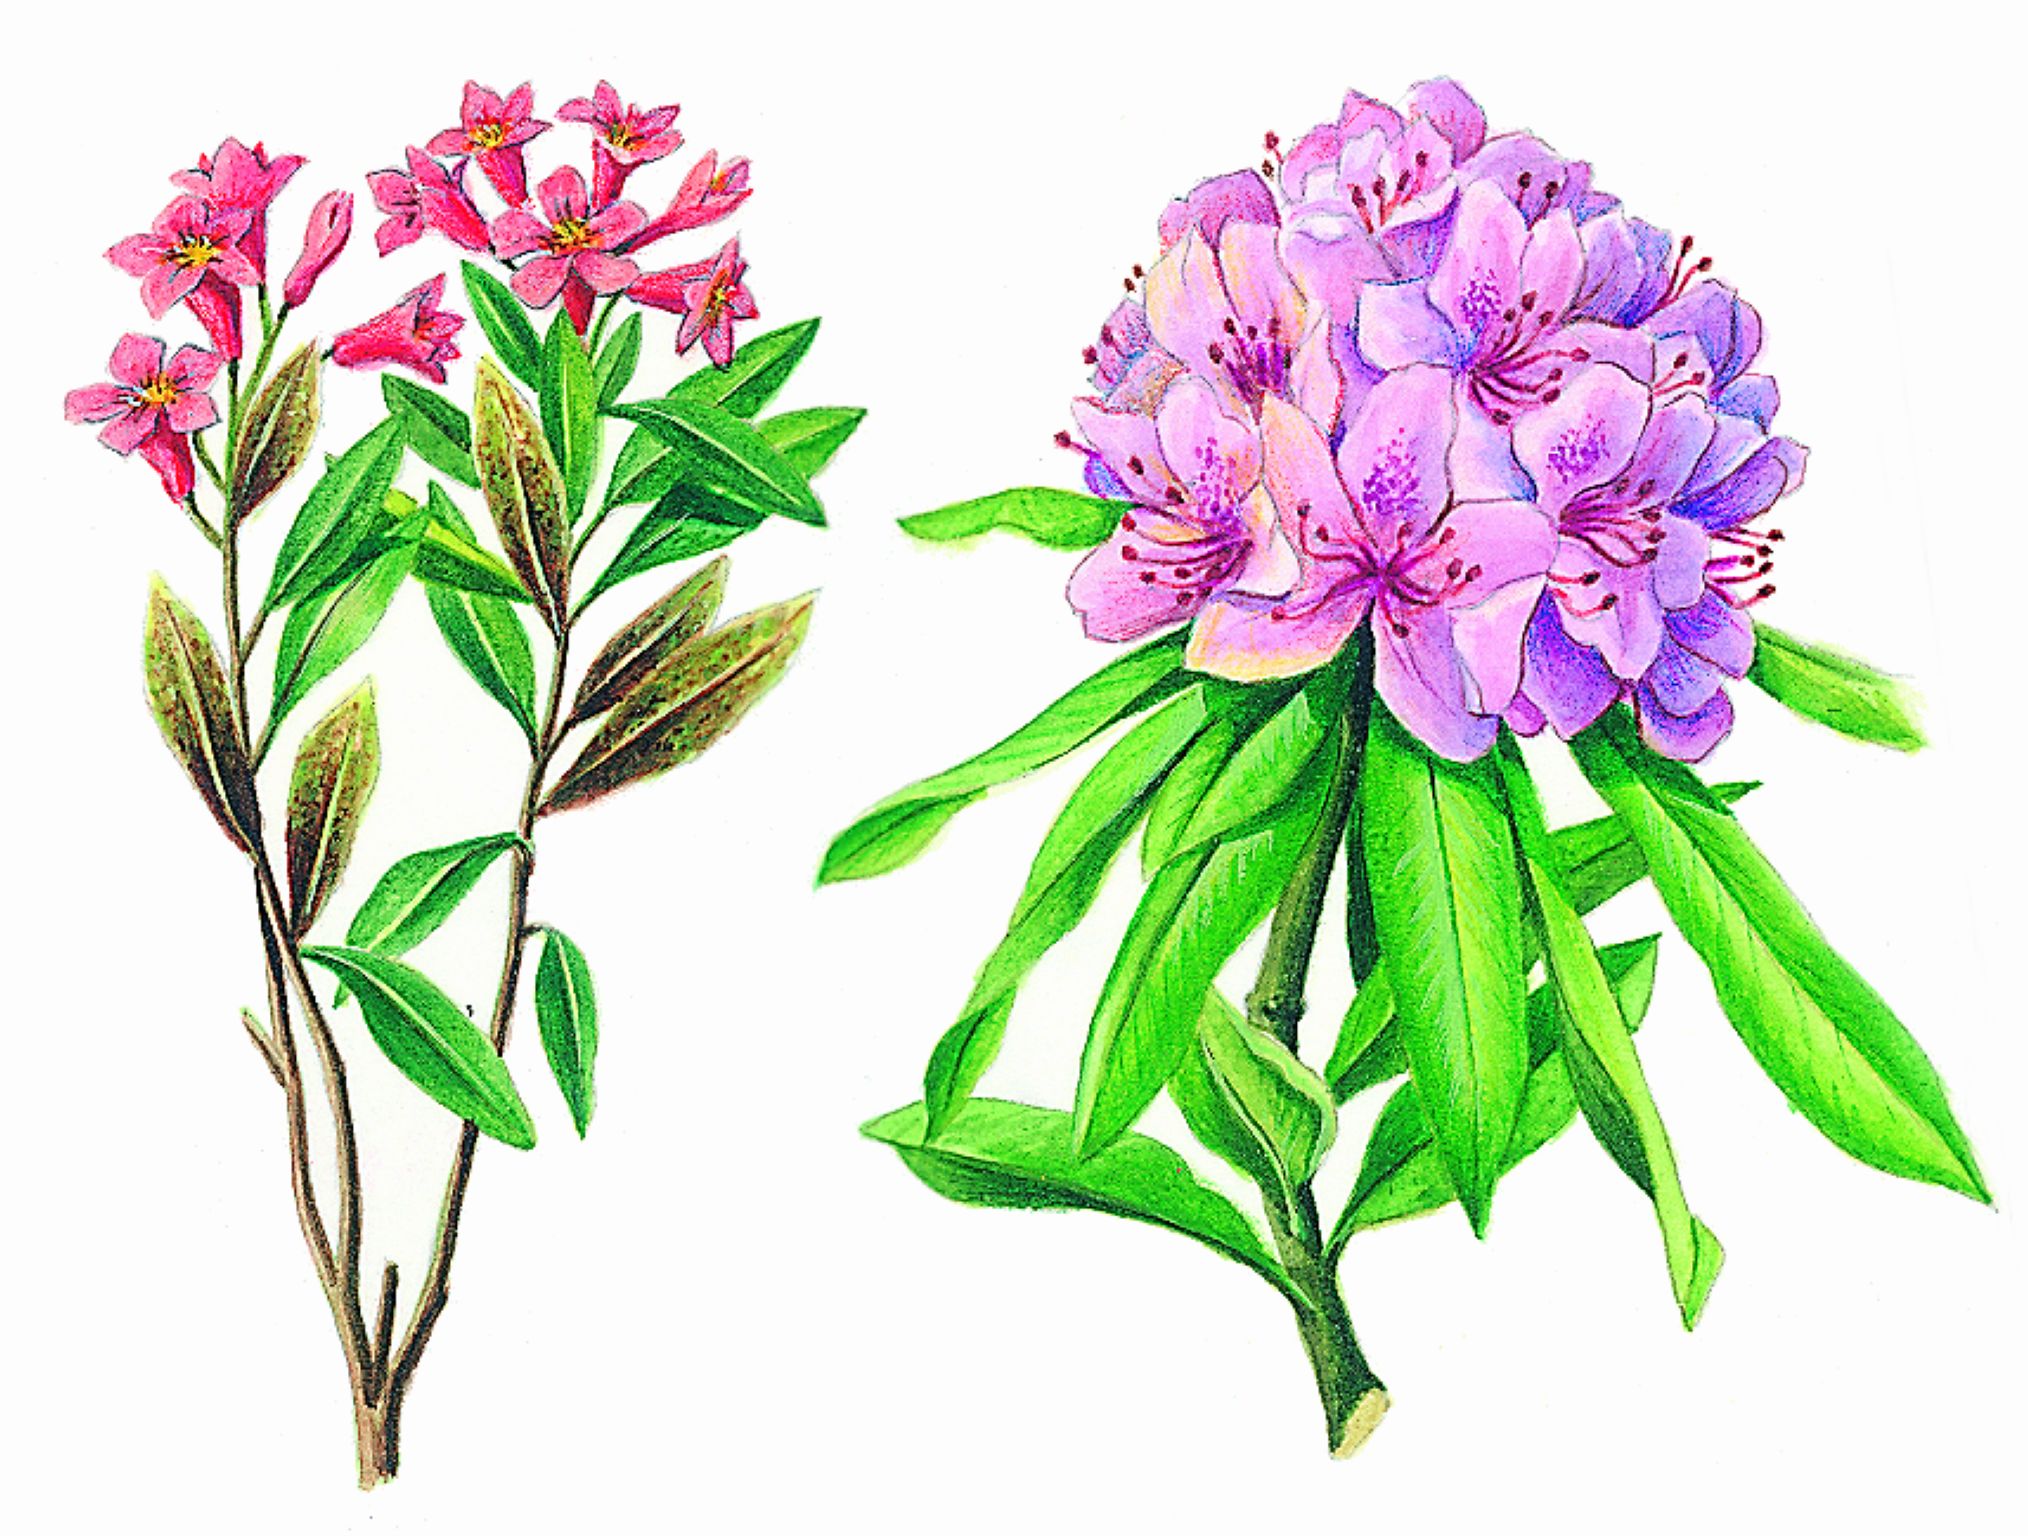 des rhododendrons